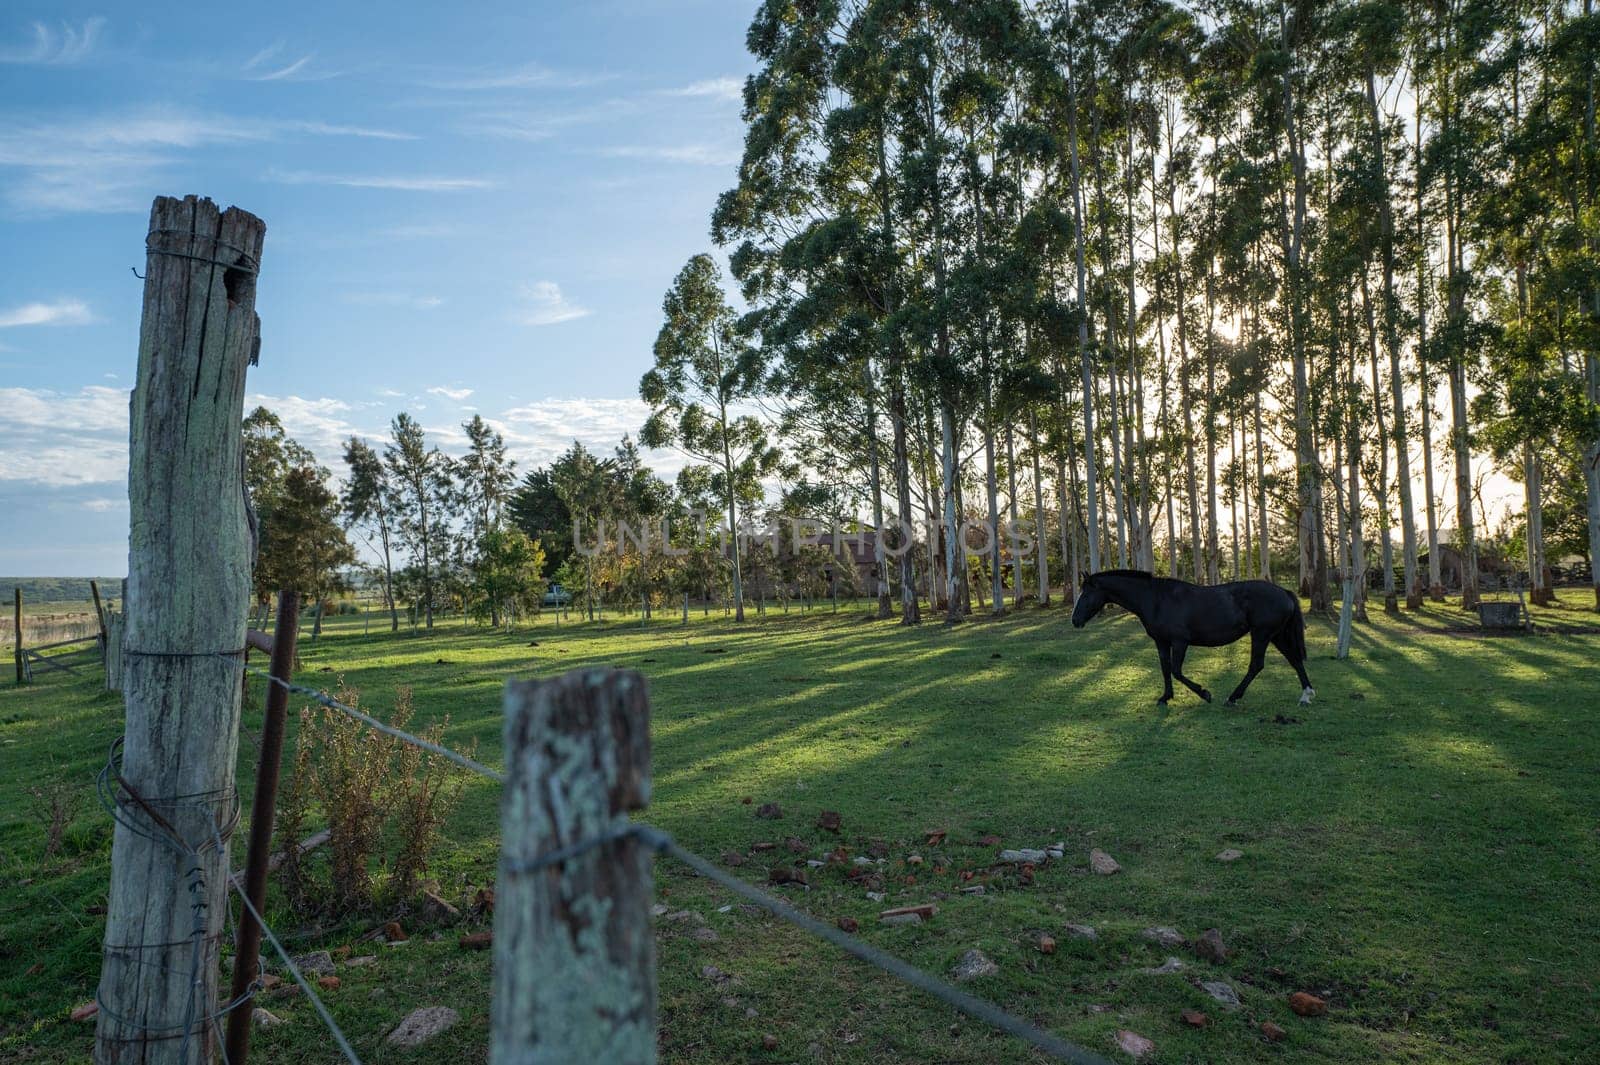 Criollo horses in the countryside of Uruguay.